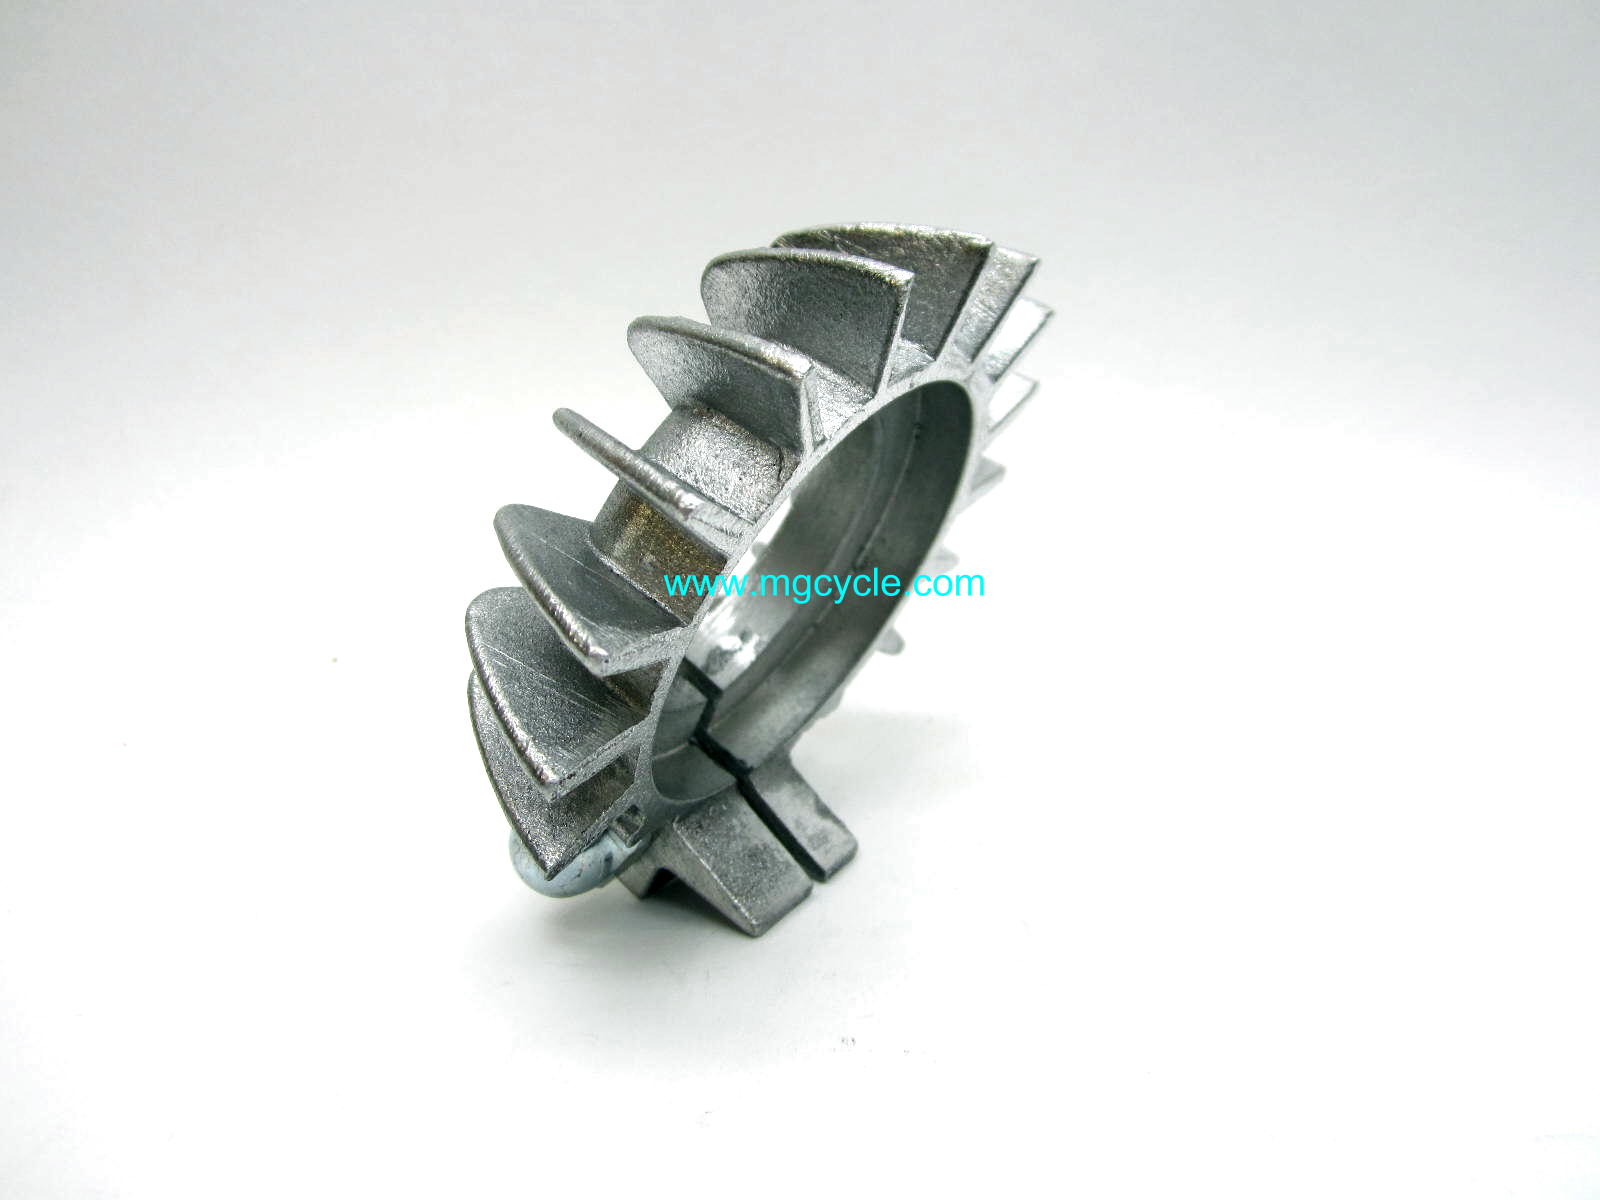 Header pipe nut clamp with cooling fins